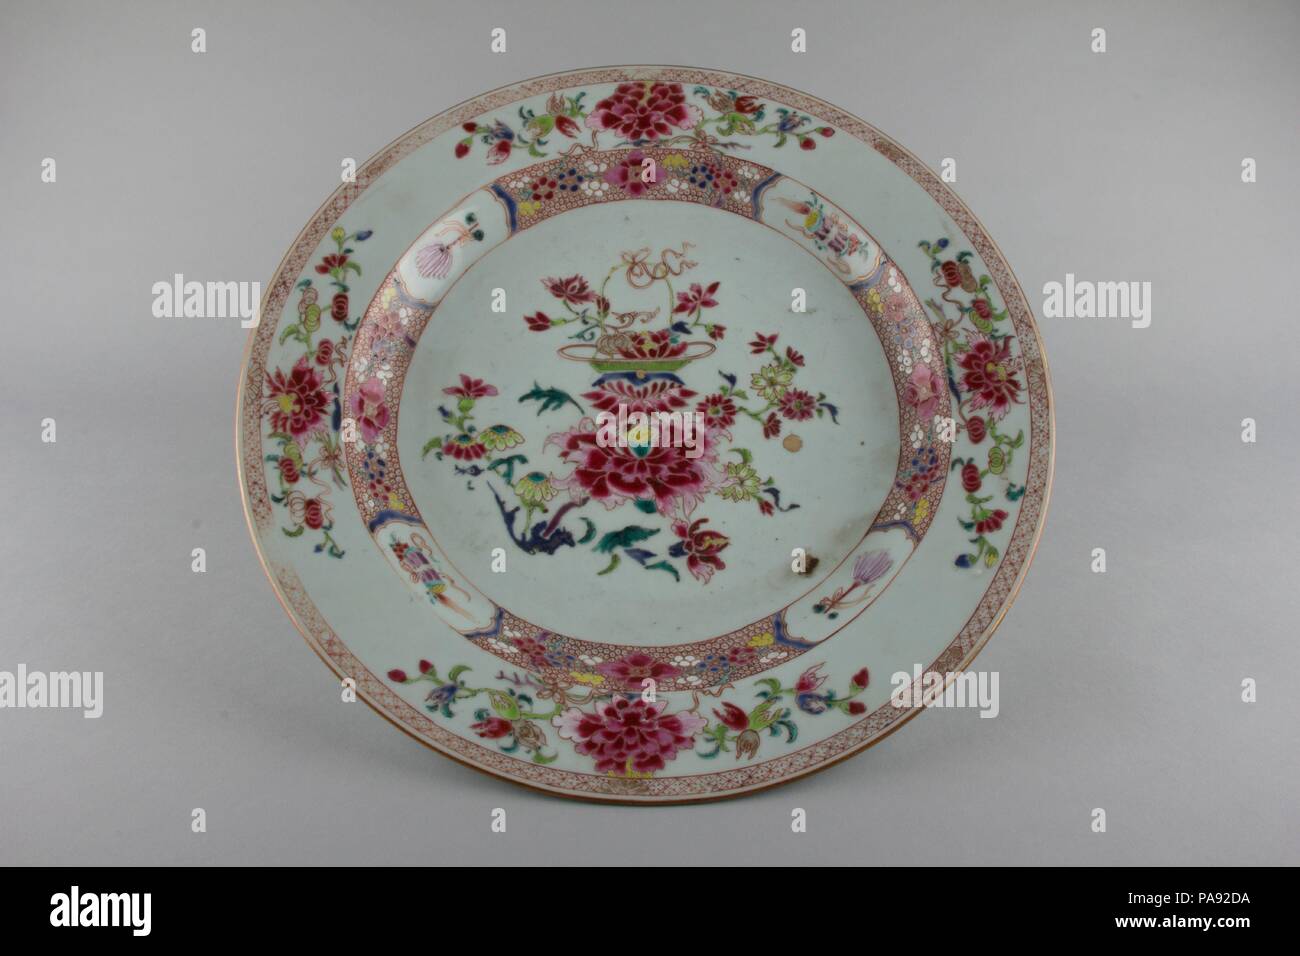 Plate. Culture: China. Dimensions: Diam. 14 3/4 in. (37.5 cm). Date: second half of the 18th century. Museum: Metropolitan Museum of Art, New York, USA. Stock Photo